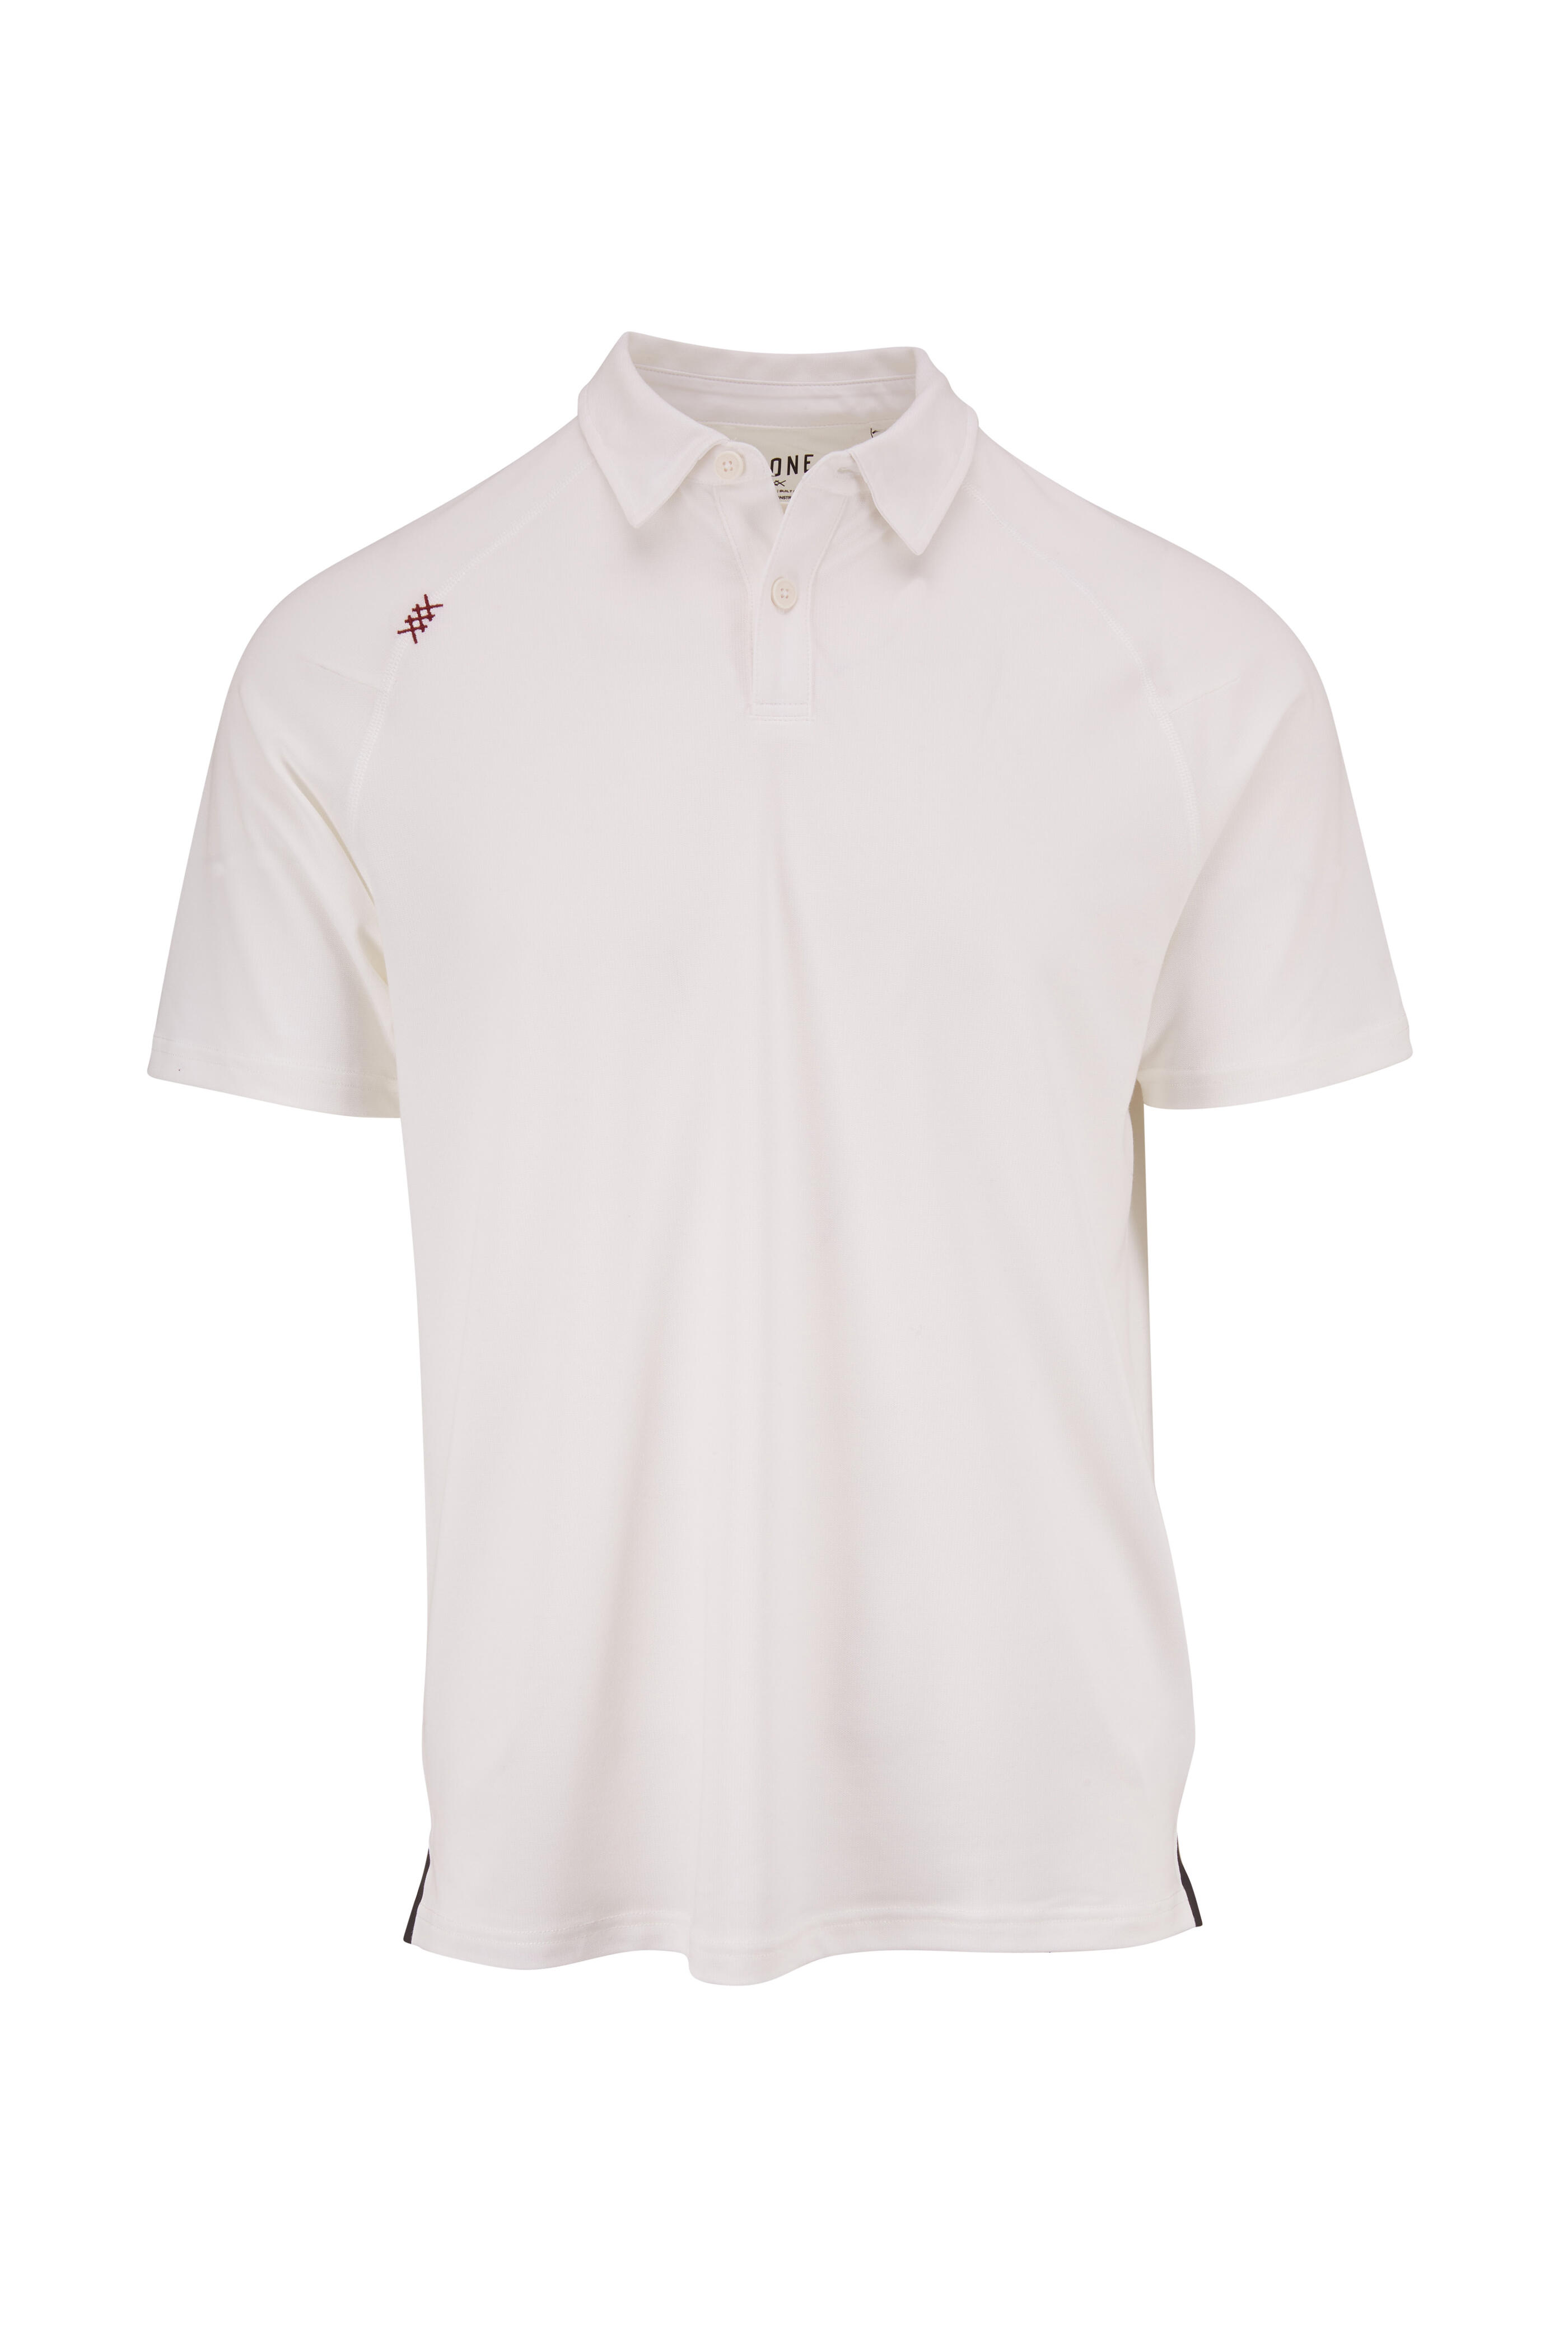 Rhone Apparel - Delta White Short Sleeve Polo | Mitchell Stores